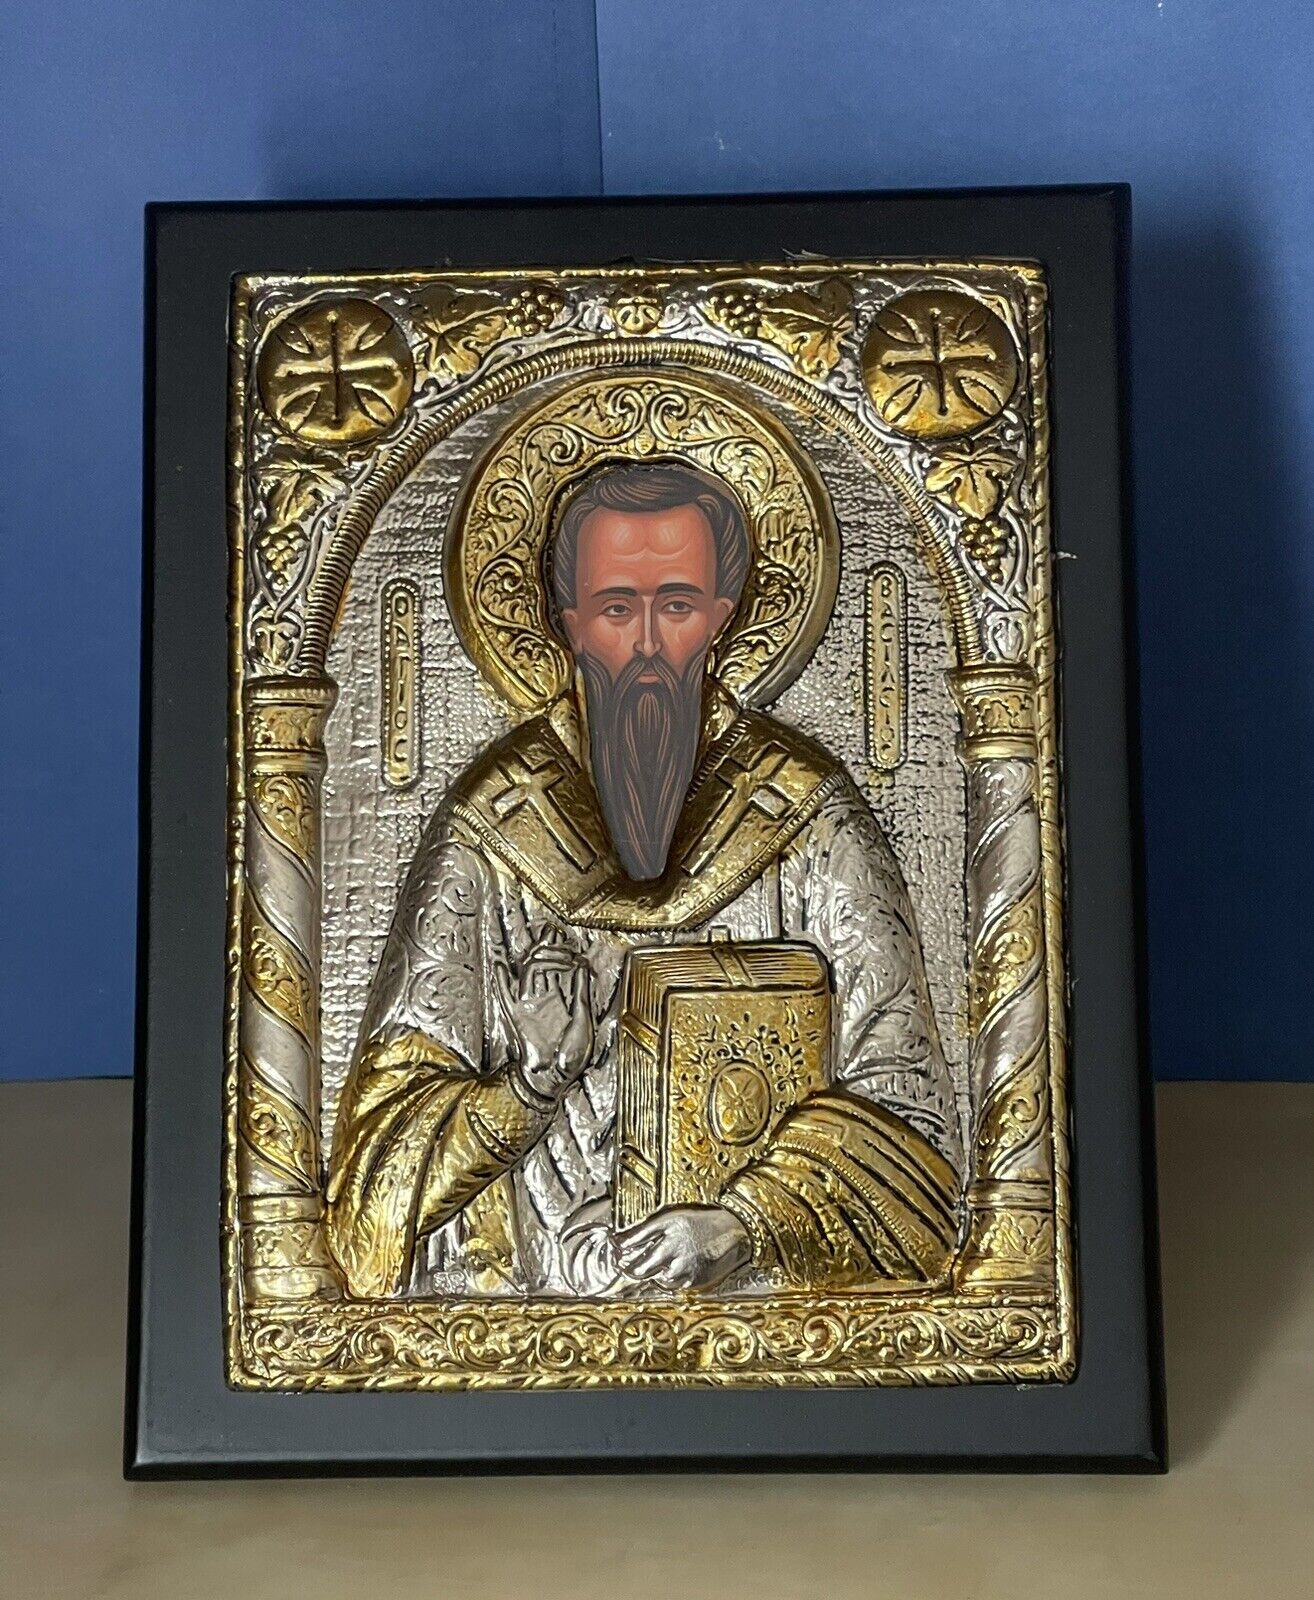 Saint Basil the Great- ORTHODOX ICONS SILVER PLATED 950 - 6.69 x 8.66 inches